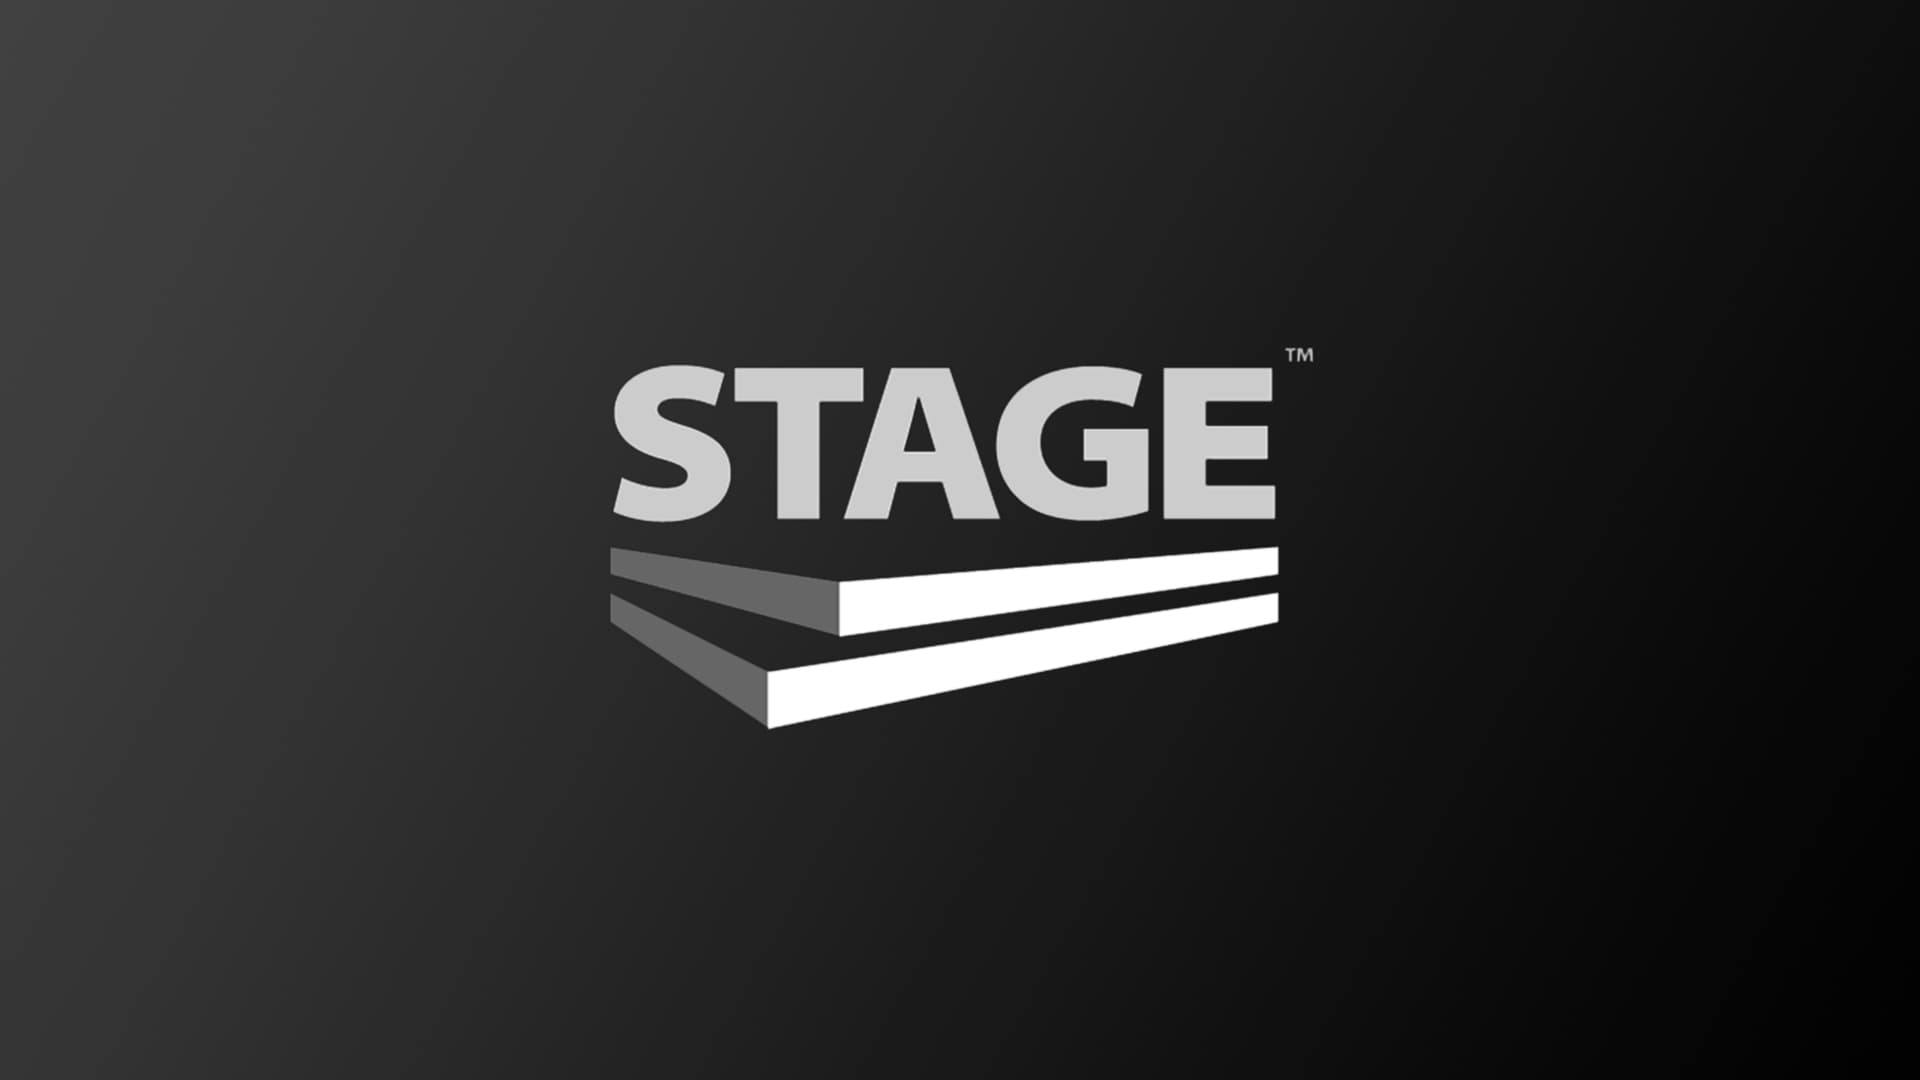 The Stage logo sits on a moody black background with the hint of a spotlight.